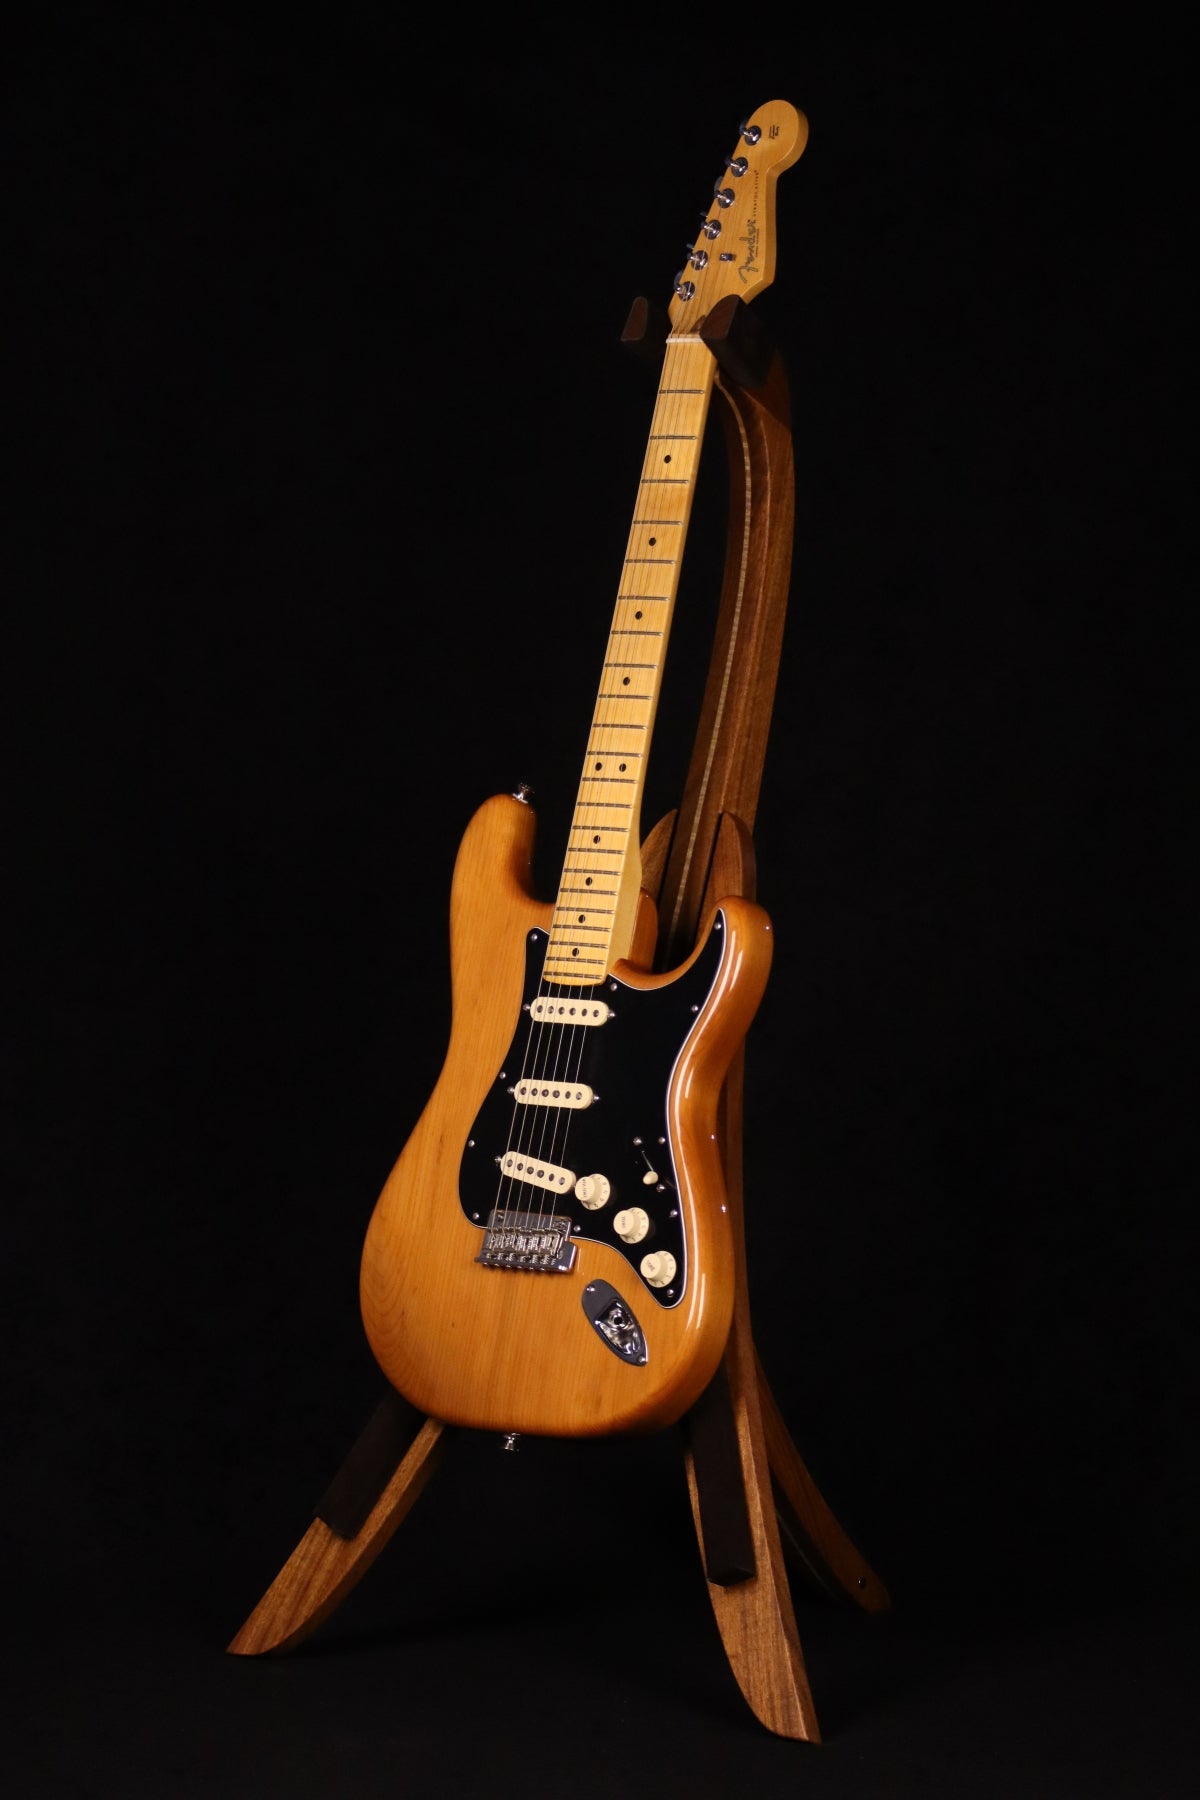 Folding sheuda ovangkol and curly maple wood guitar stand full front image with Fender guitar